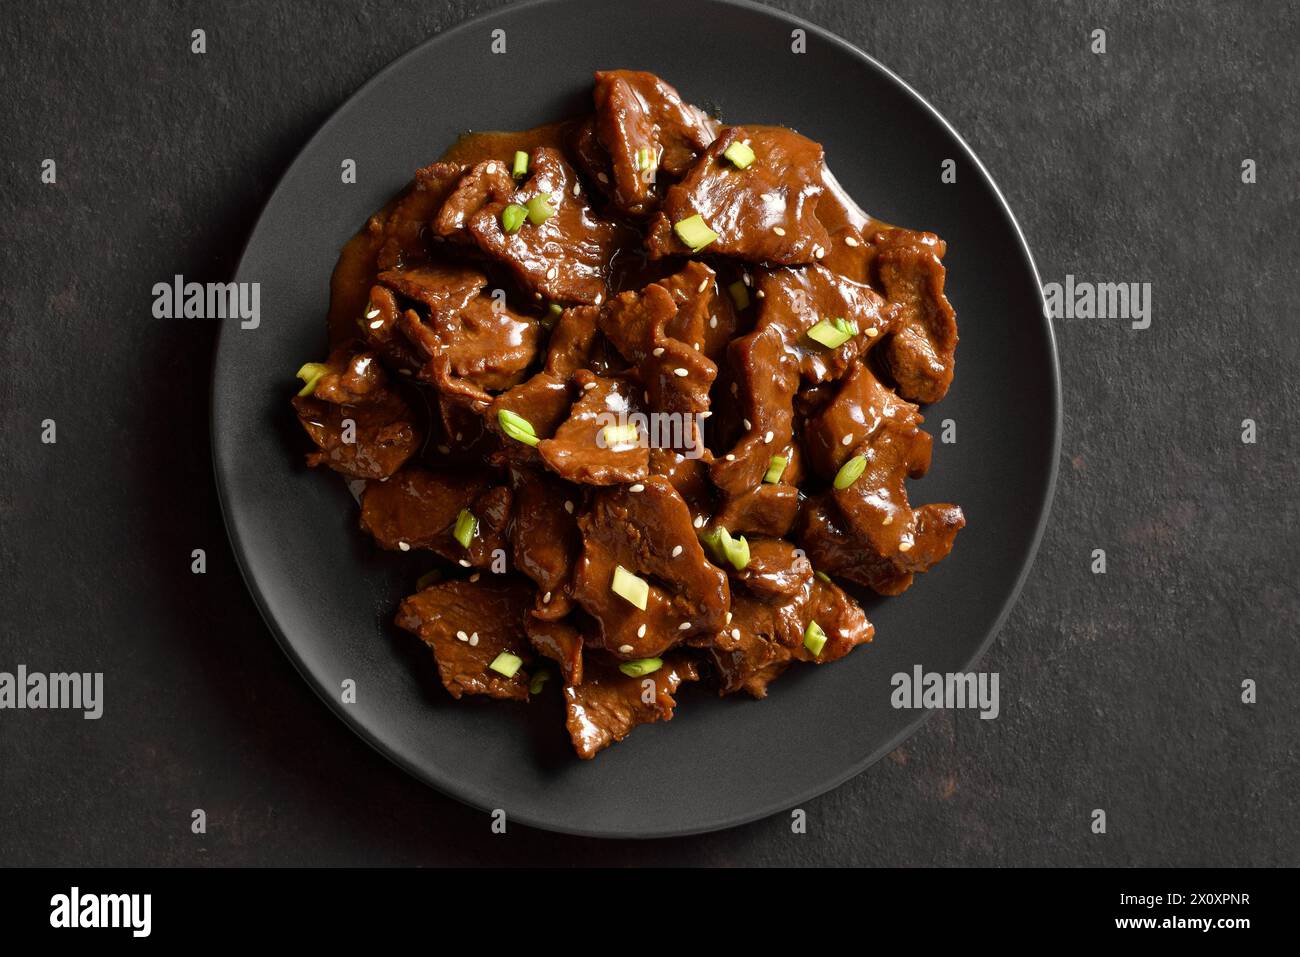 Close up view of asian style beef with soy sauce, green onion and sesame seeds on plate over dark stone background. Top view, flat lay Stock Photo